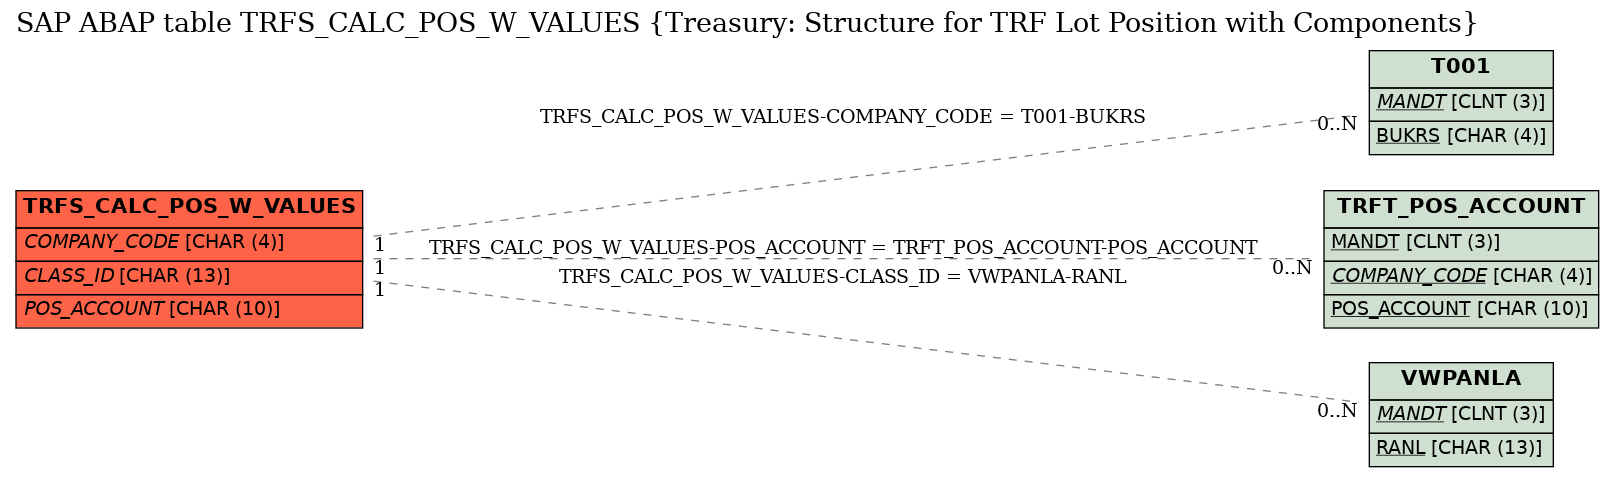 E-R Diagram for table TRFS_CALC_POS_W_VALUES (Treasury: Structure for TRF Lot Position with Components)